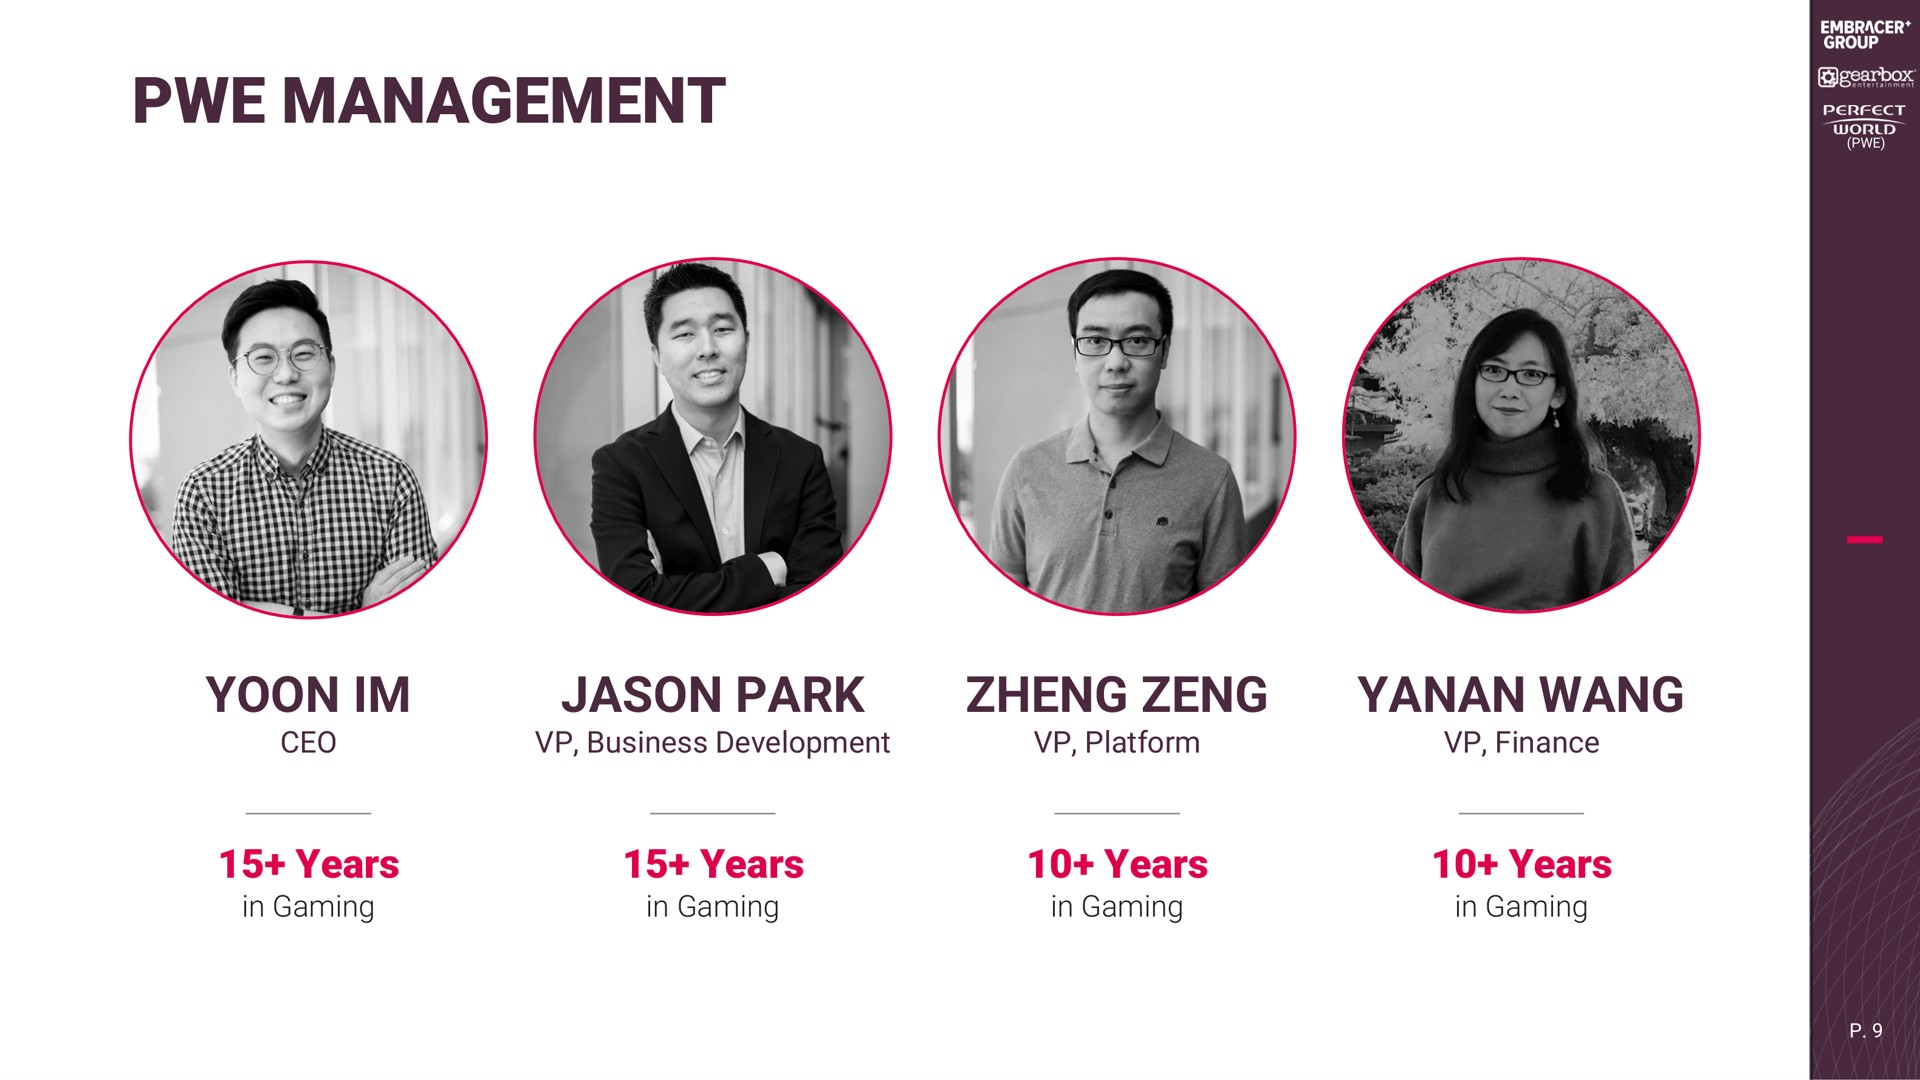 management park wang years years years years | Embracer Group